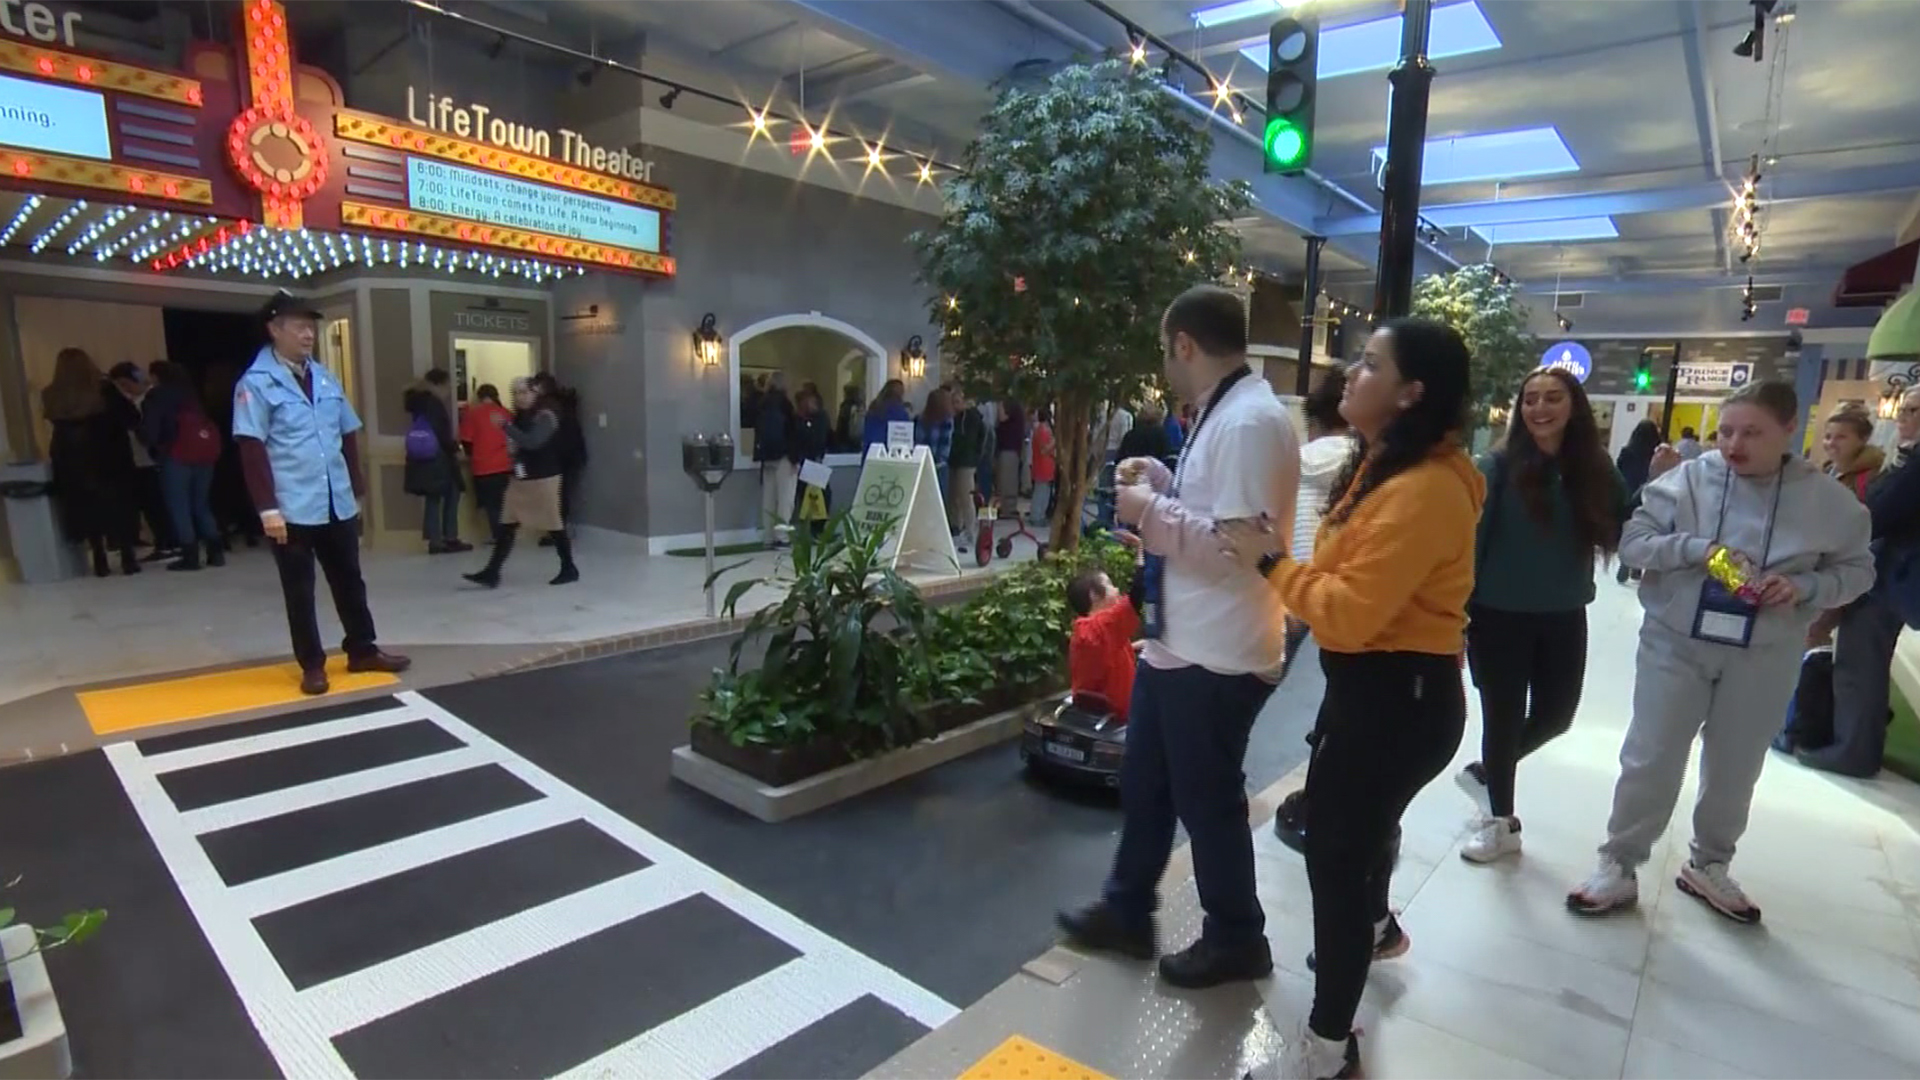 Make-believe mall gives children with disabilities important life skills